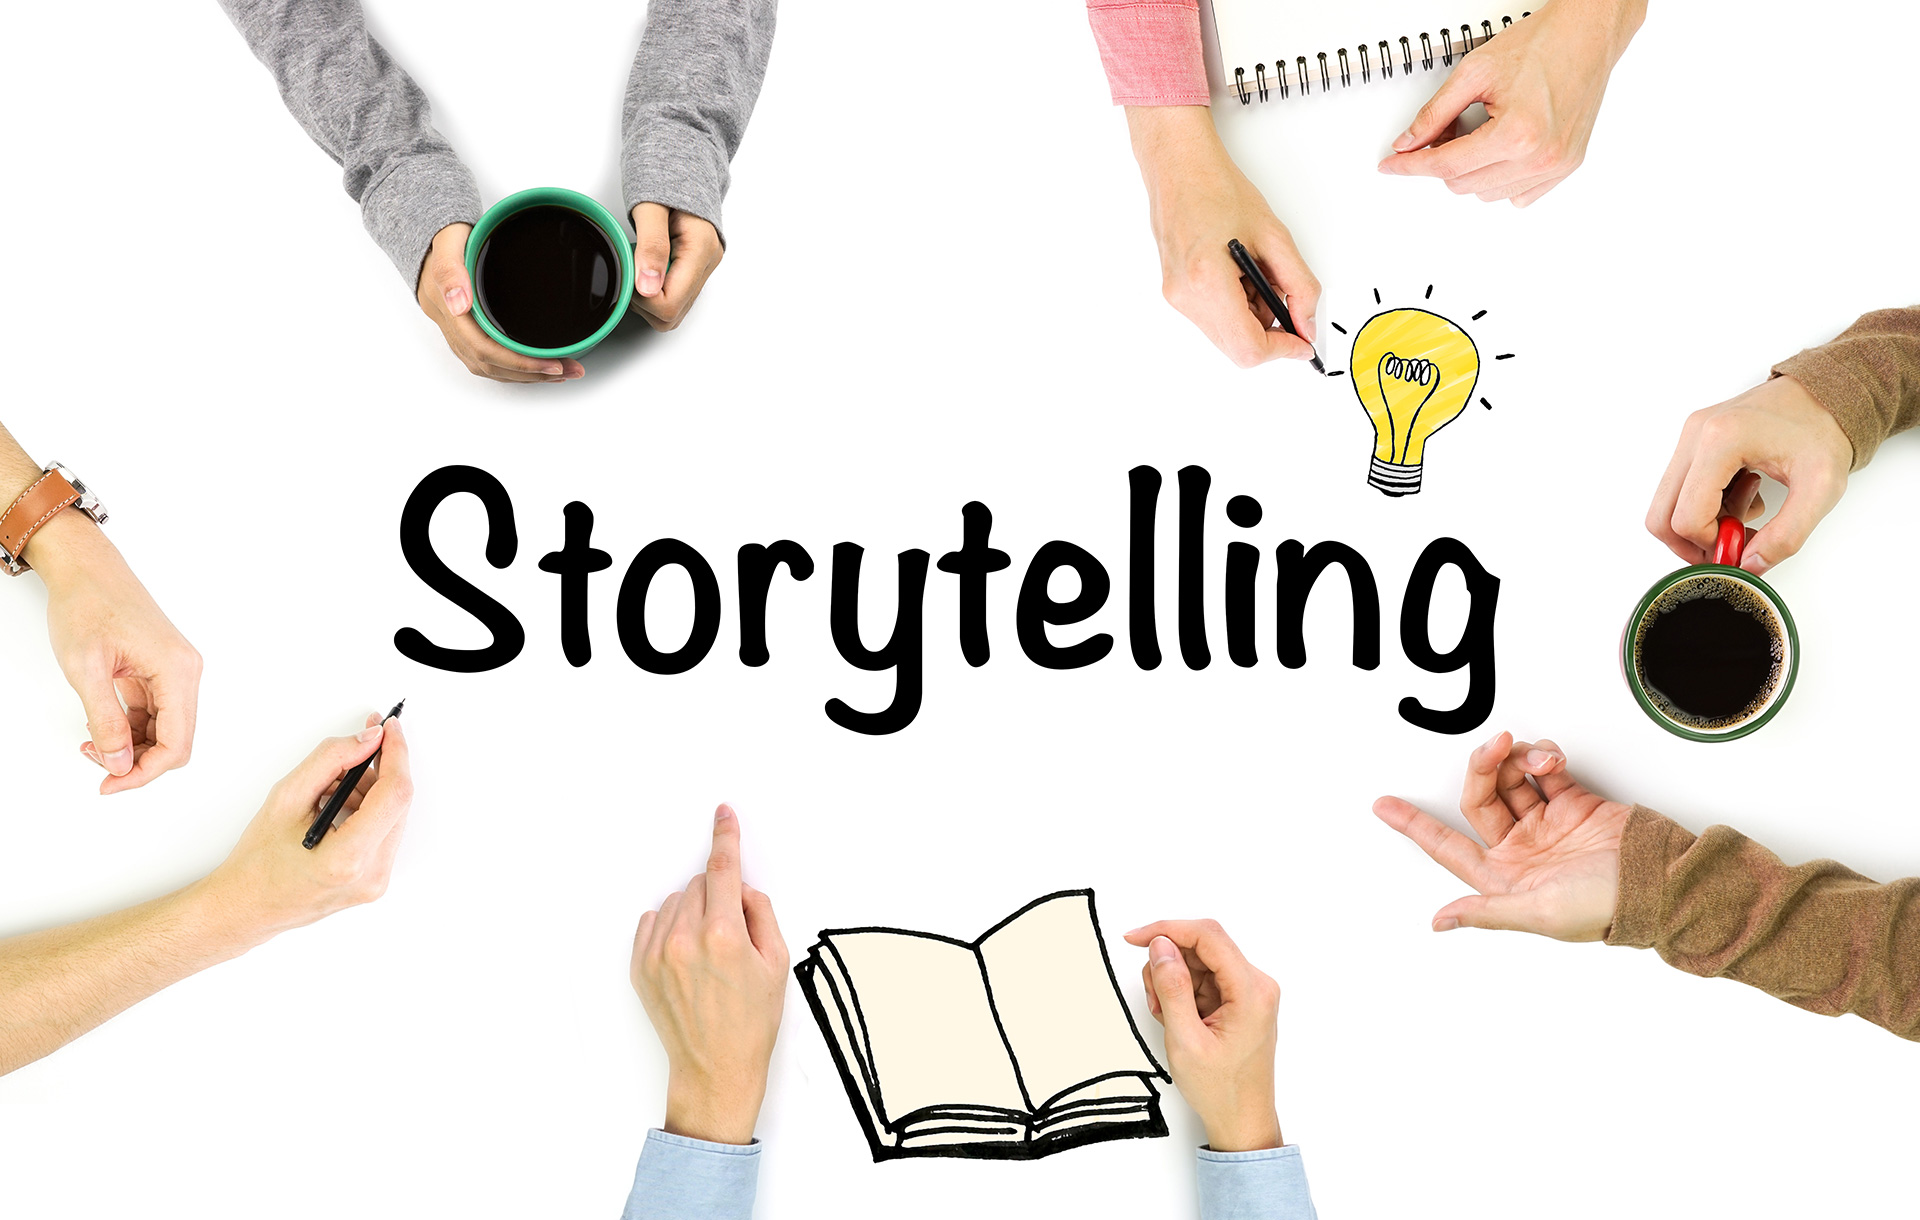 How to Create Storytelling Content for your e-commerce brand?